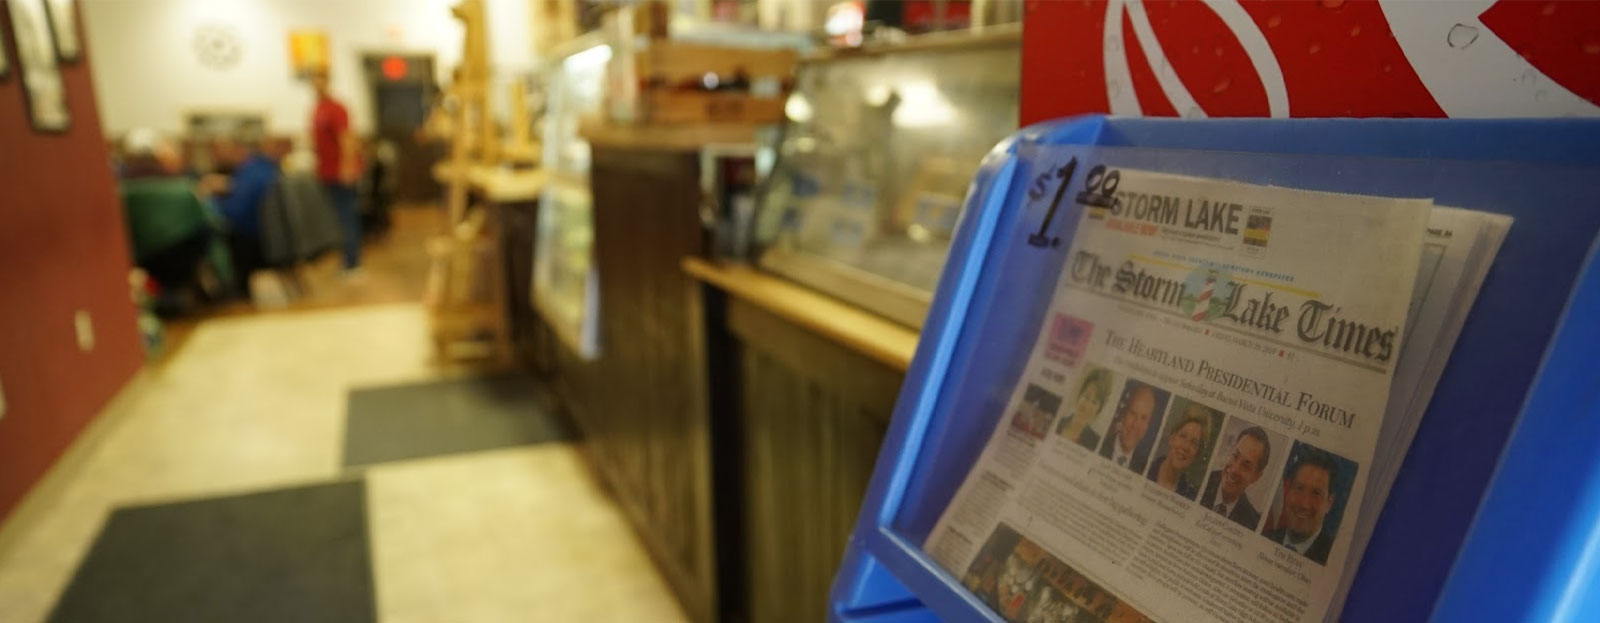 Storm Lake Times newspaper in blue plastic box in a diner